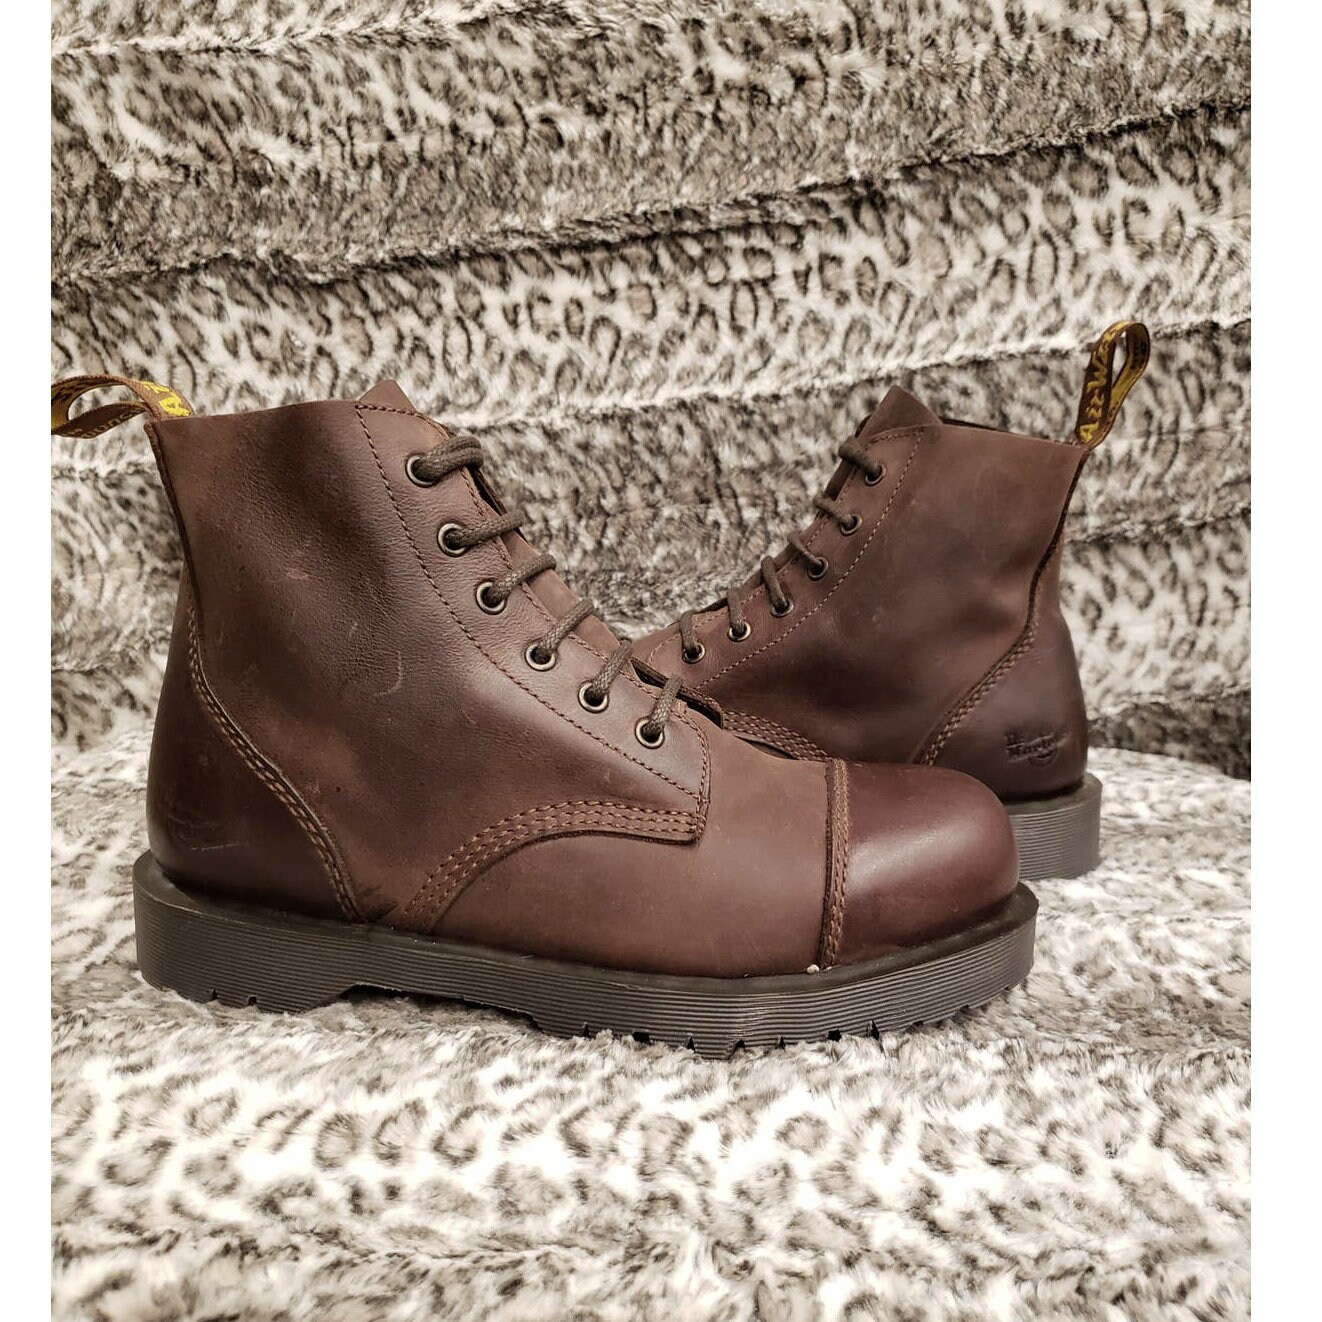 Dr Martens Wallace Ammo Boot - Etsy